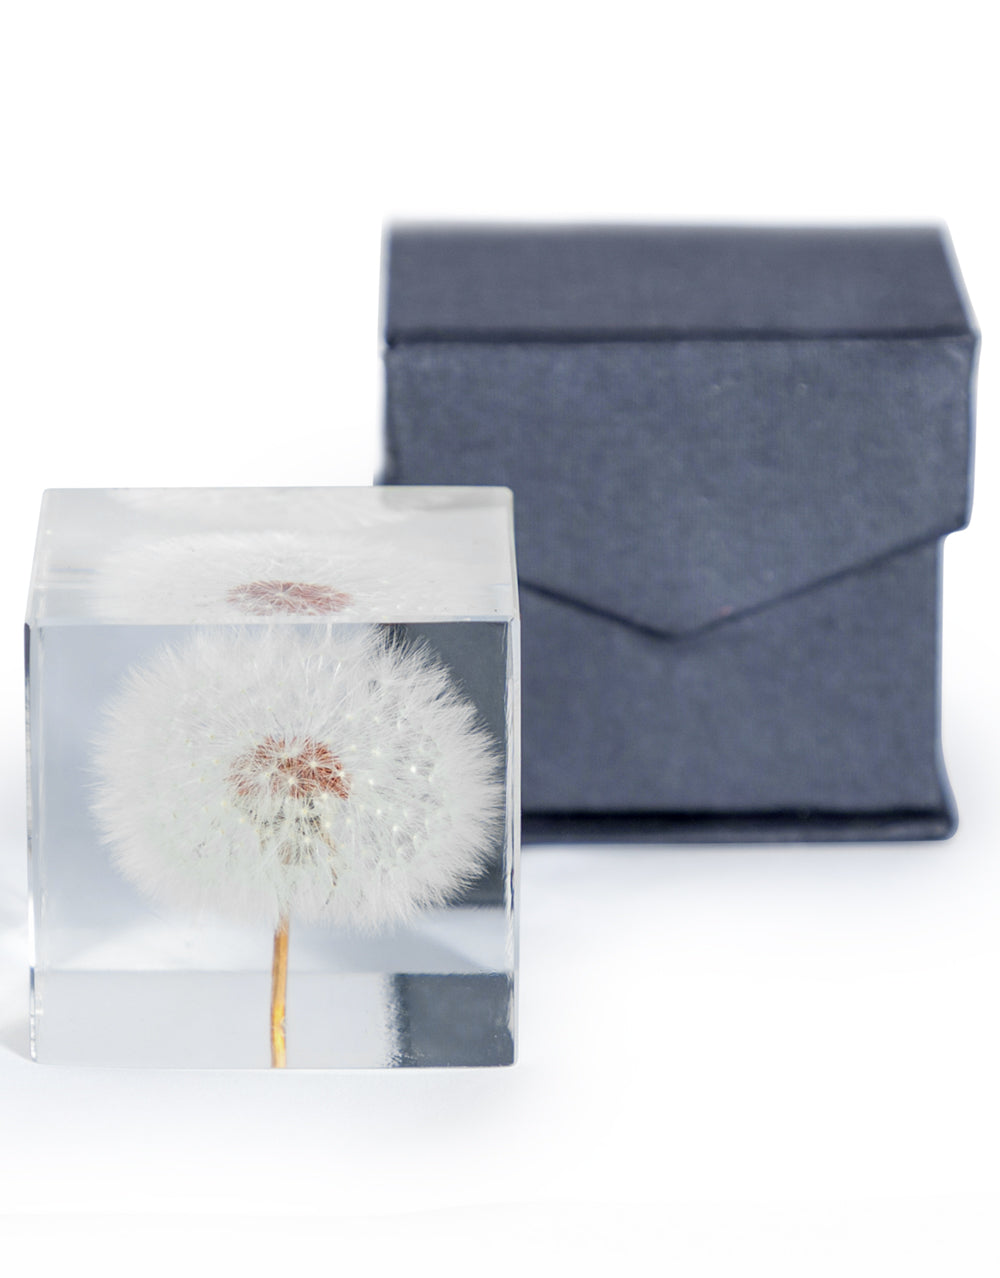 Square Acrylic Glass Real Dandelion Paperweight with Gift Box